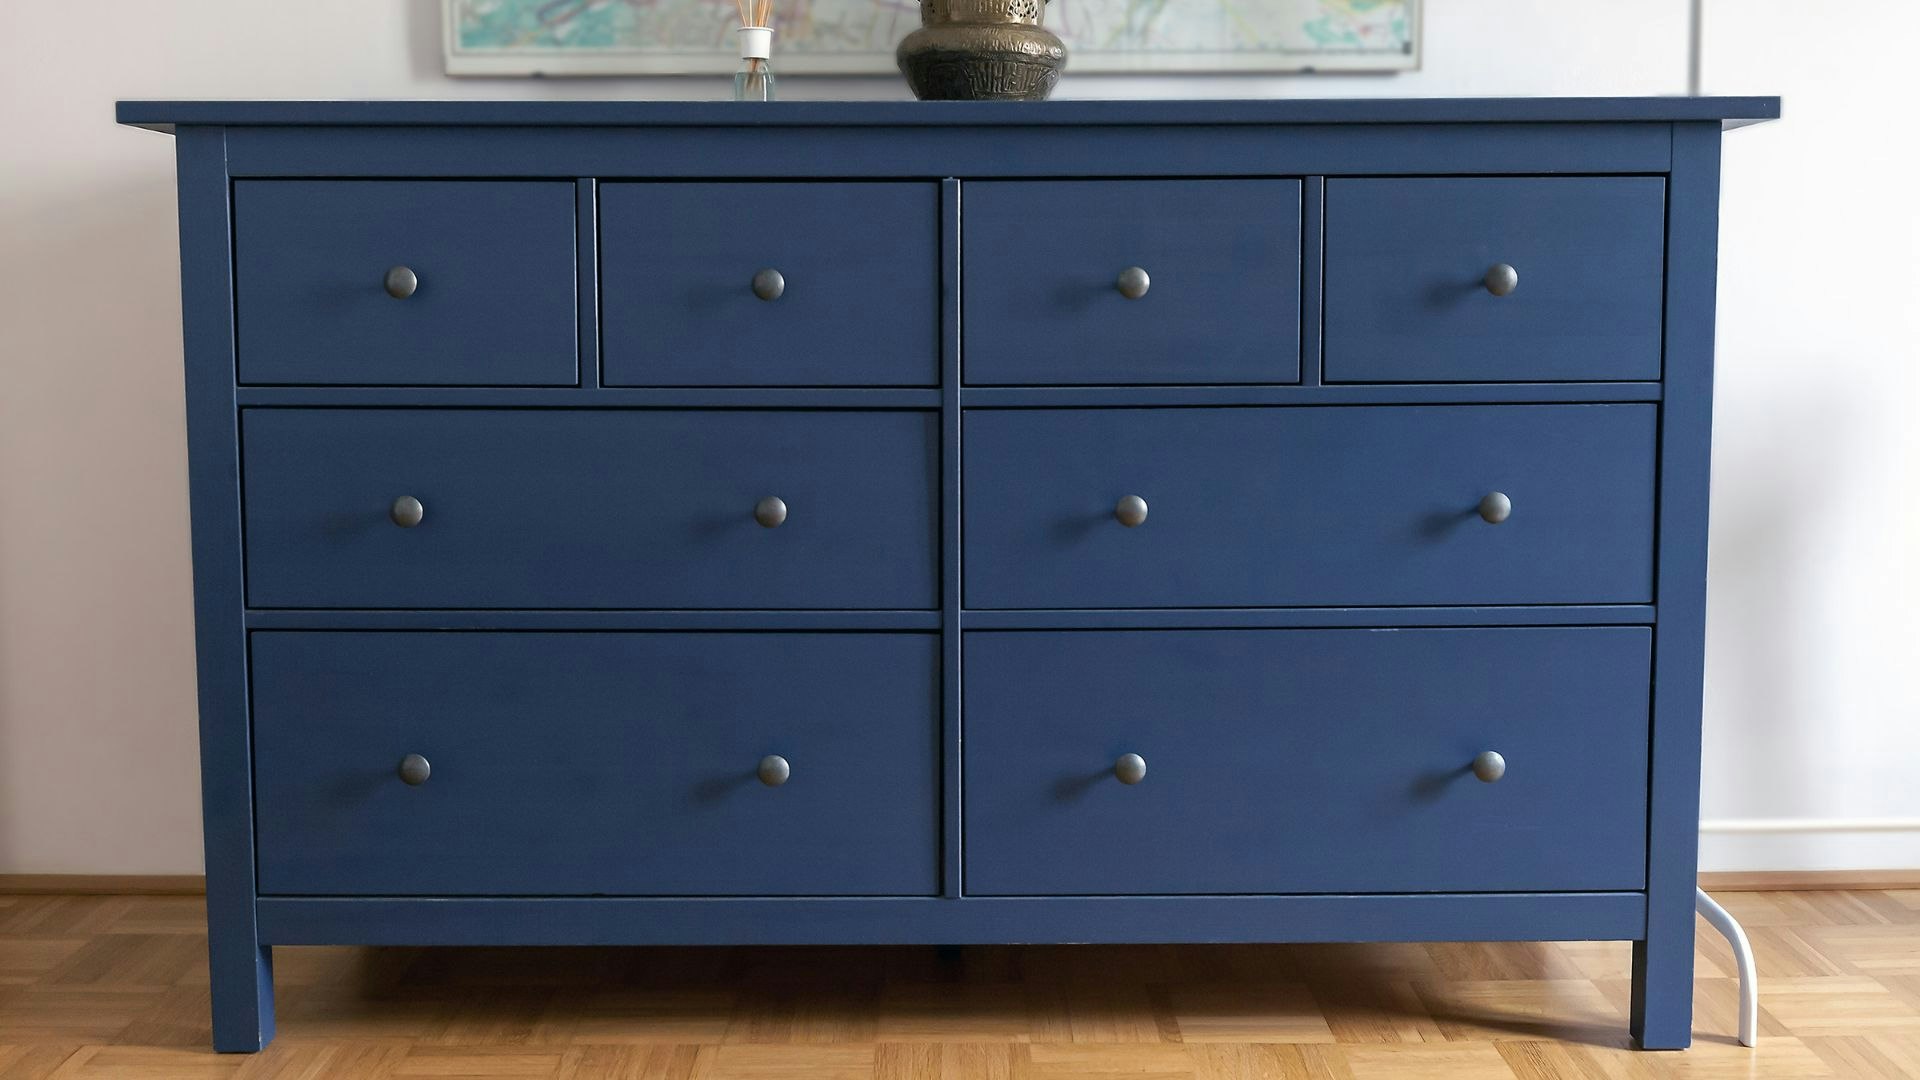 Navy bedroom ideas: A navy blue chest of drawers